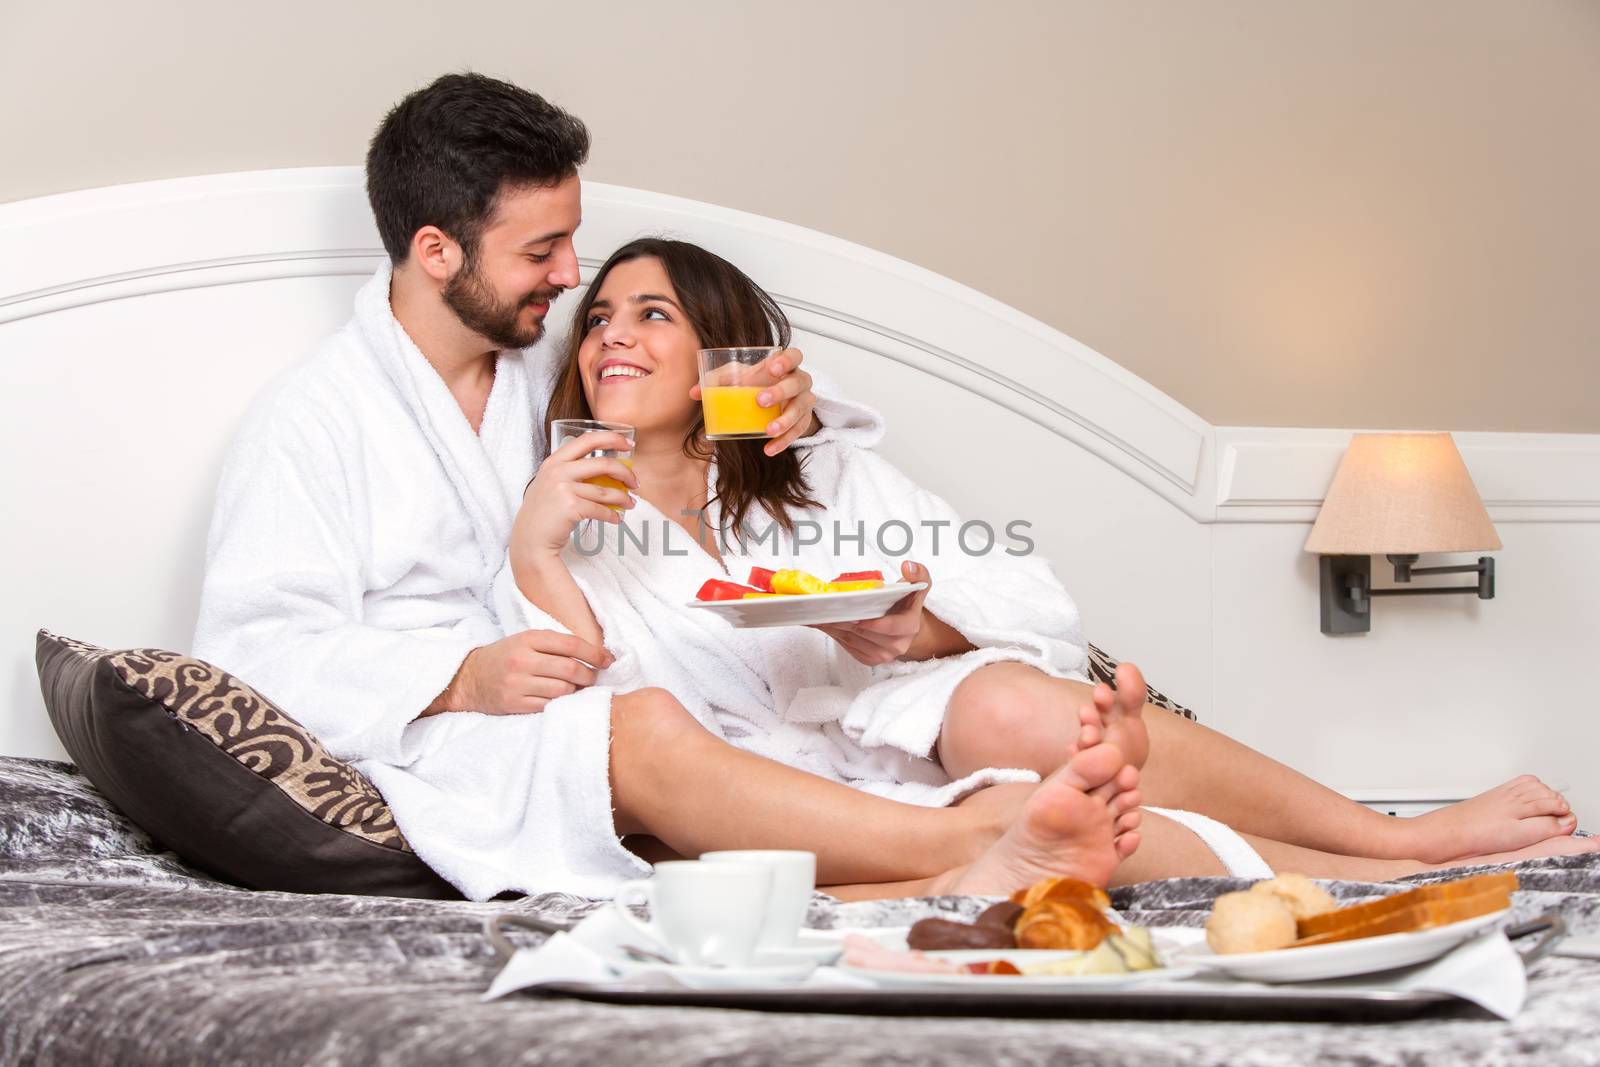 Close up portrait of Young couple on honeymoon in hotel room. Couple enjoying room service with breakfast tray.